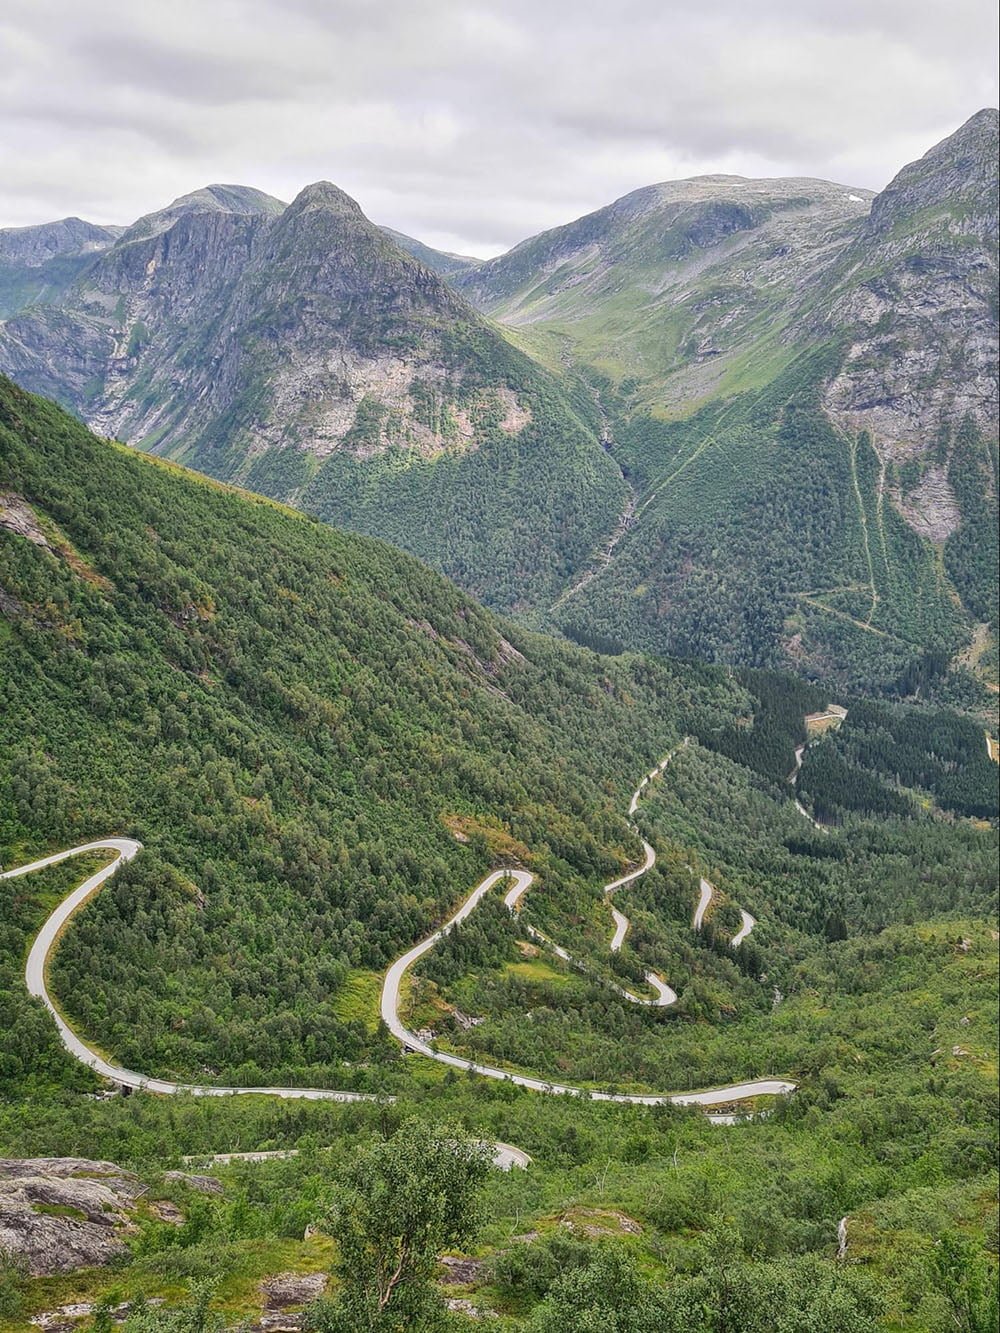 Gaularfjellet scenic route in Norway.